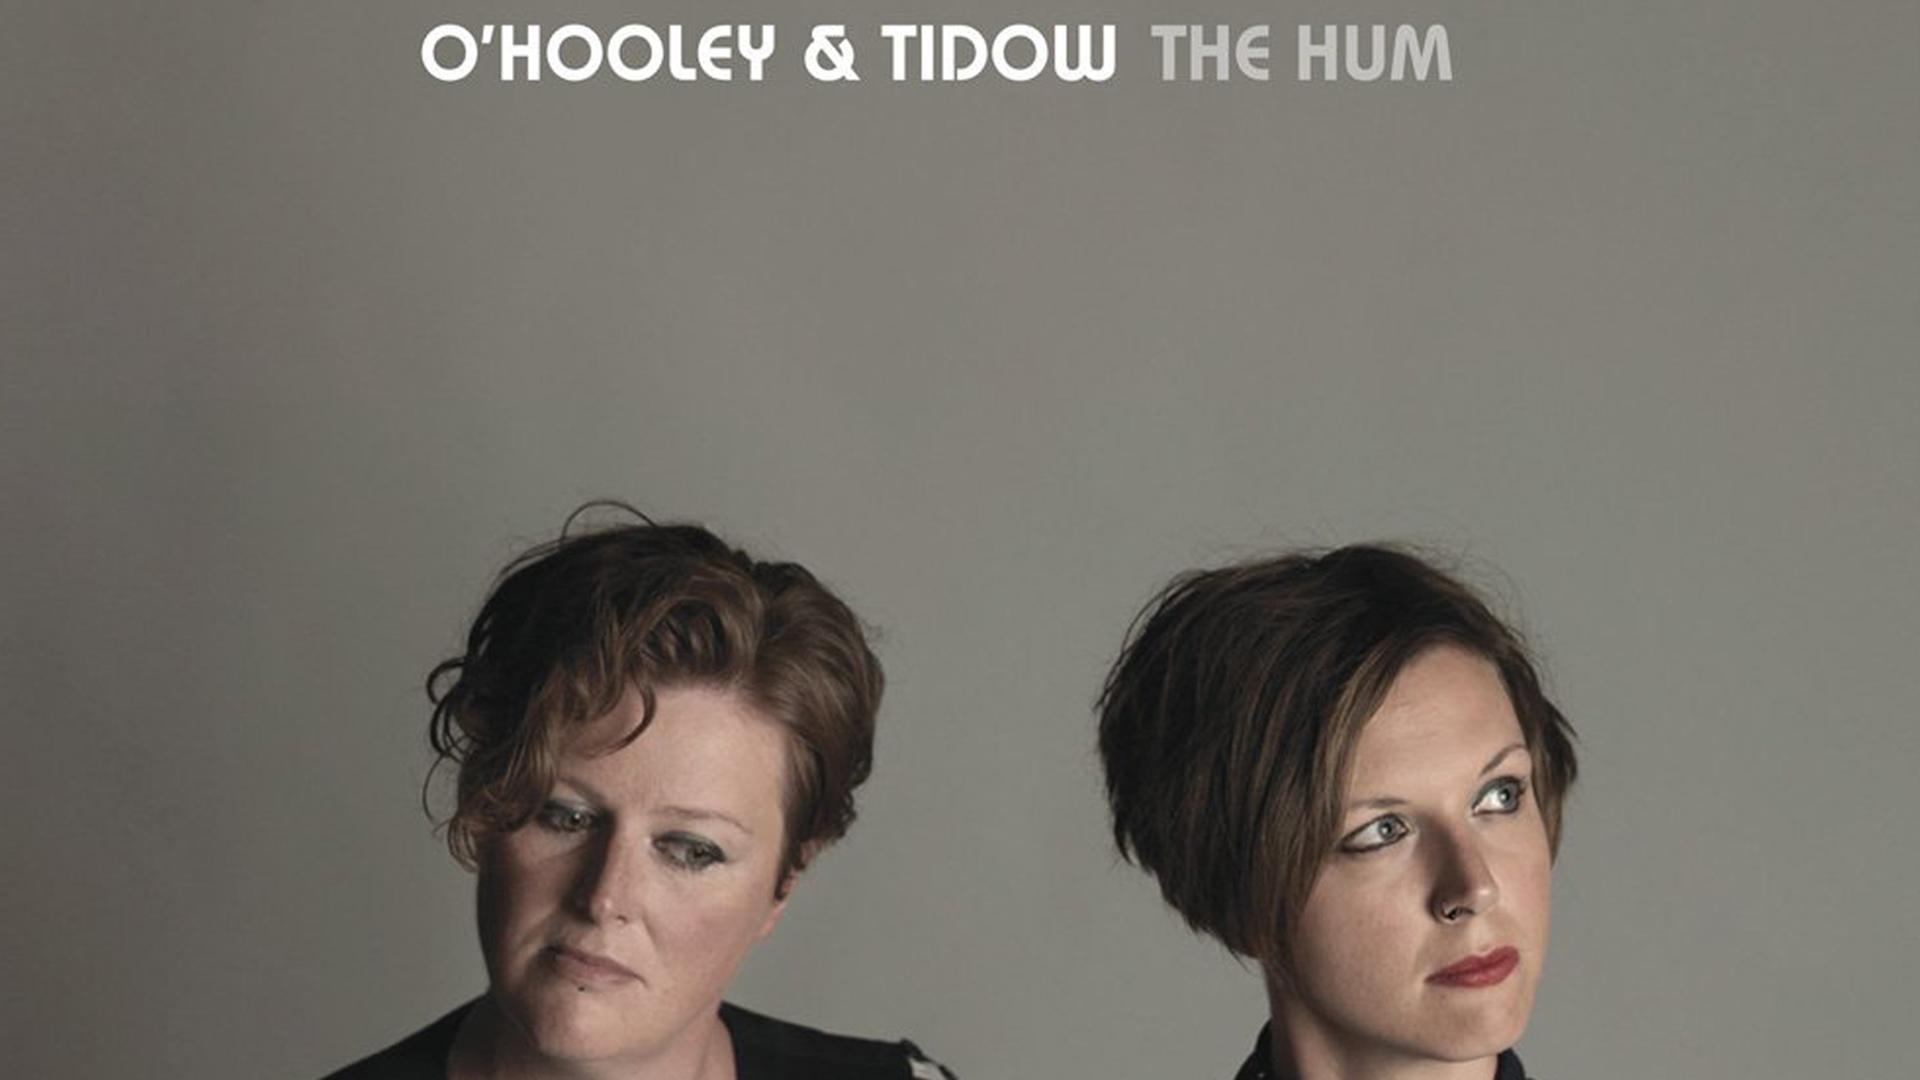 O'Hooley and Tidow: "The Hum"